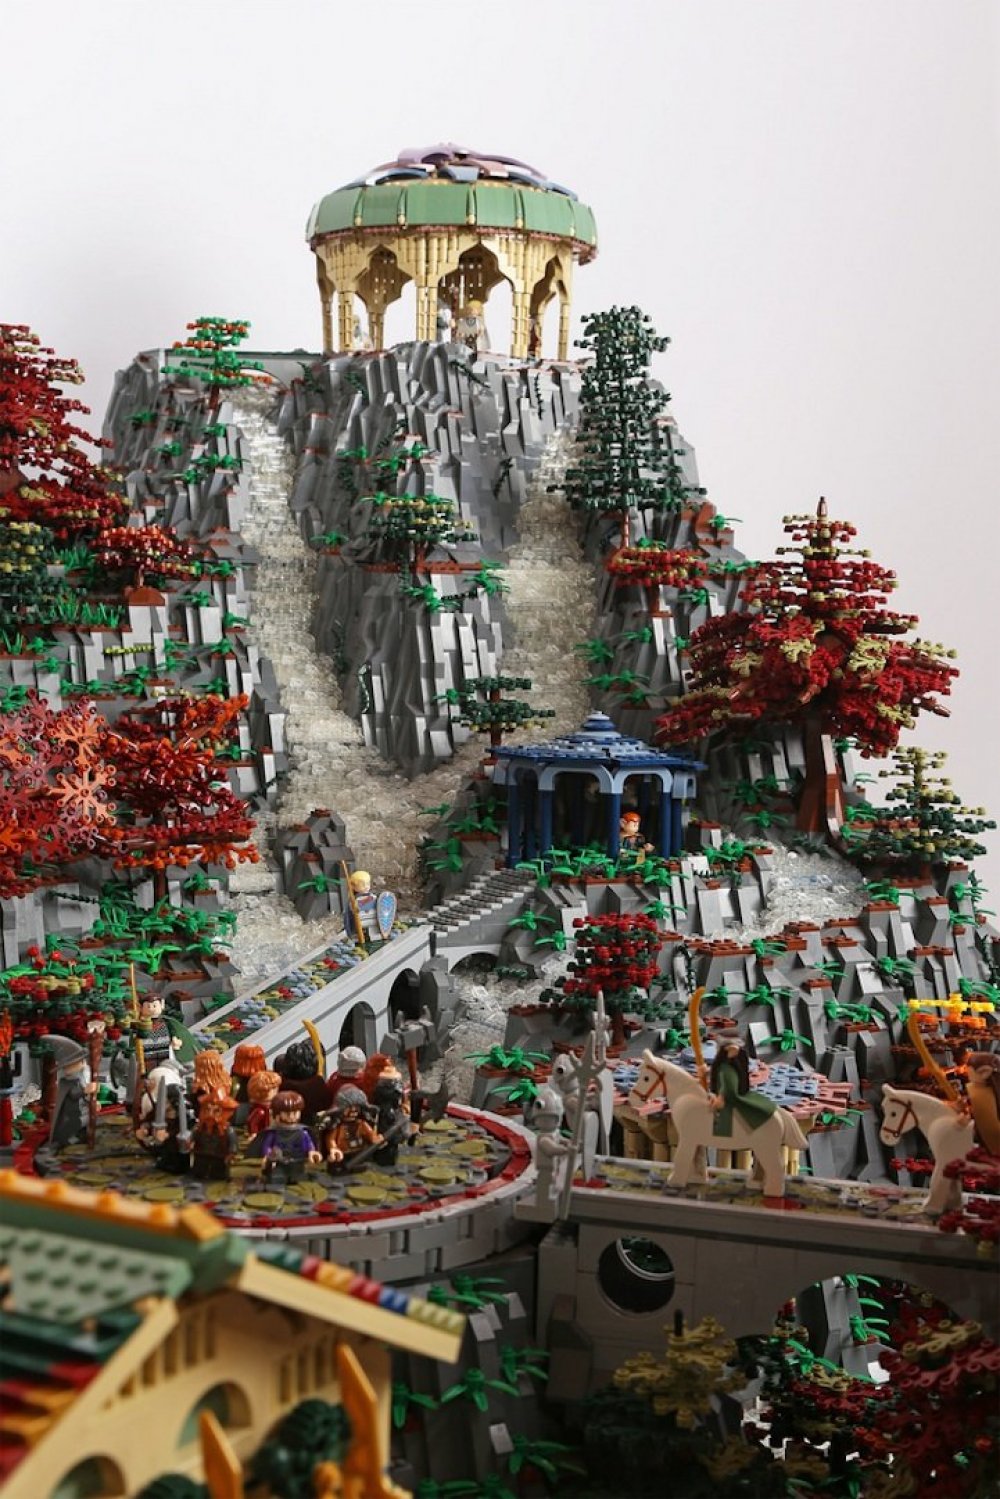 An outpost based on Lord of the Rings & raquo; from 200 thousand LEGO-items